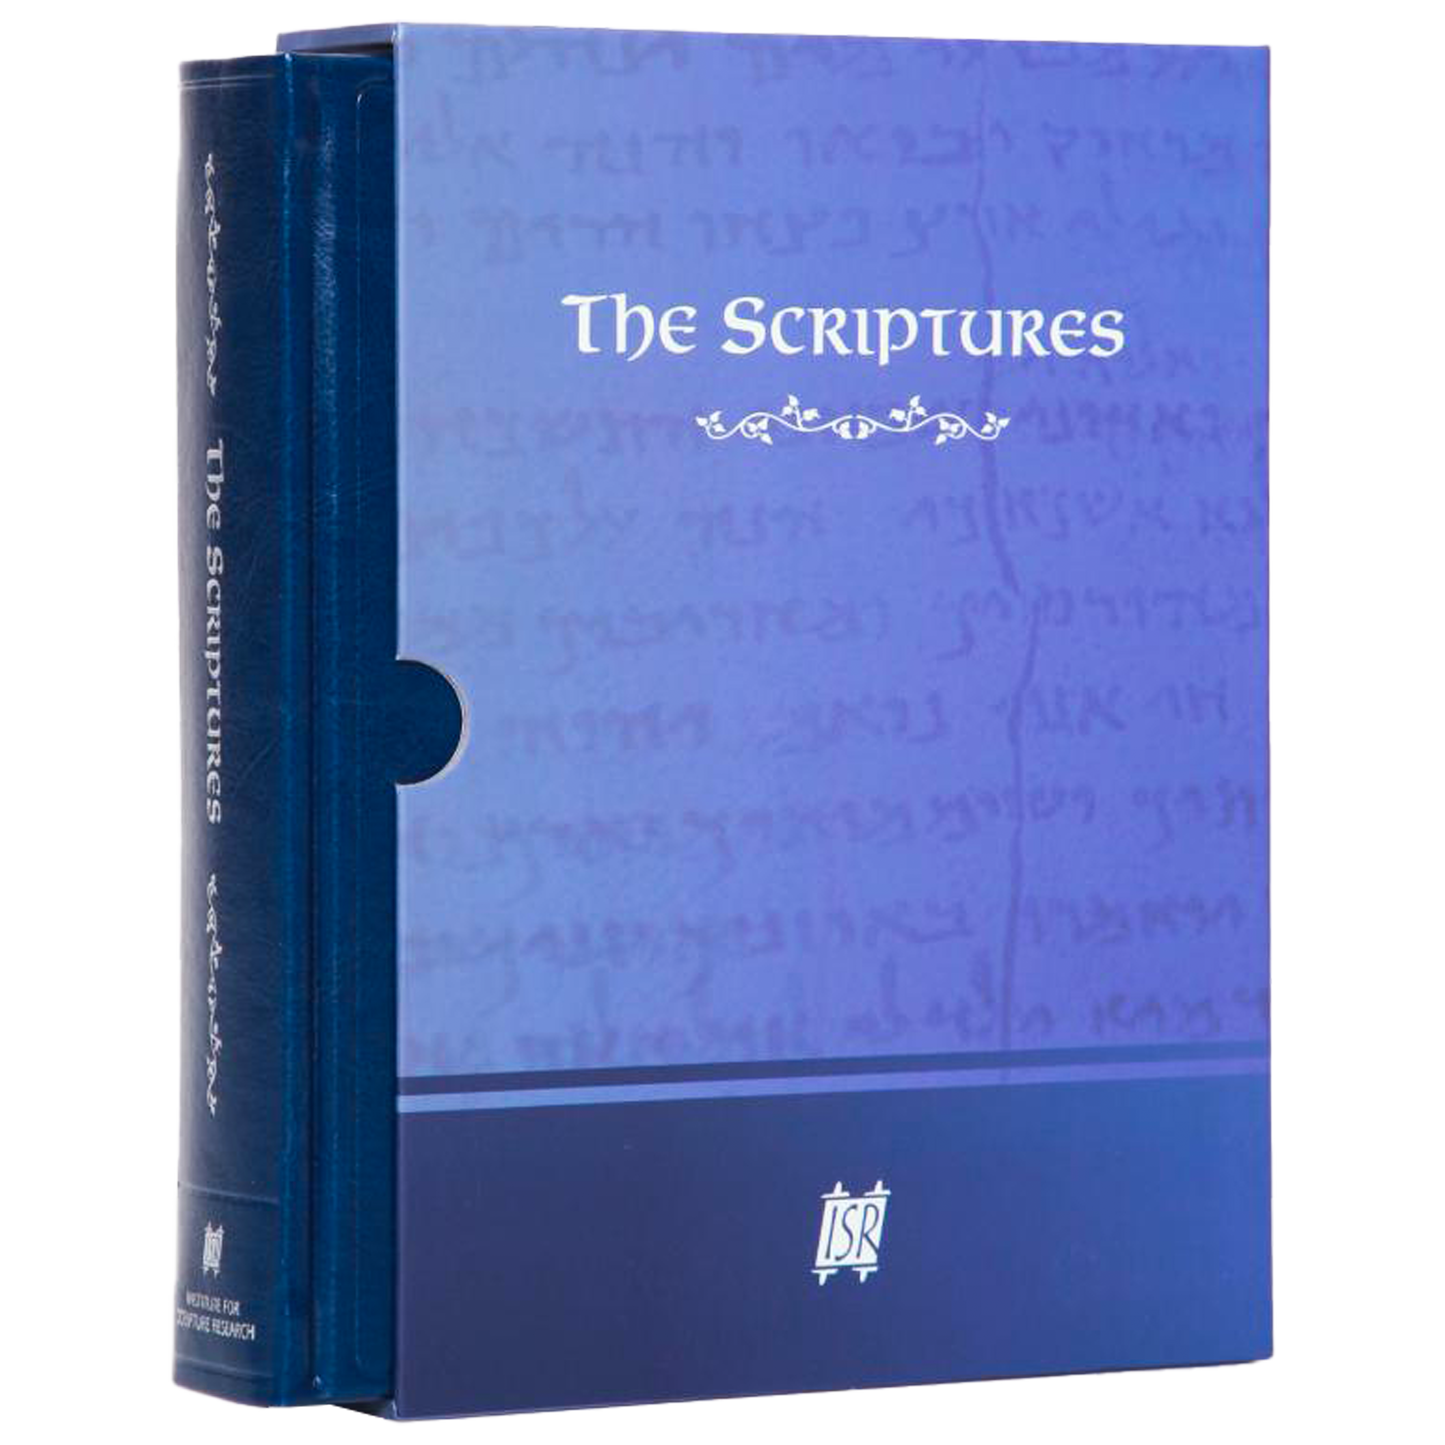 The Scriptures Hard Cover Bible with Thumb Indexing